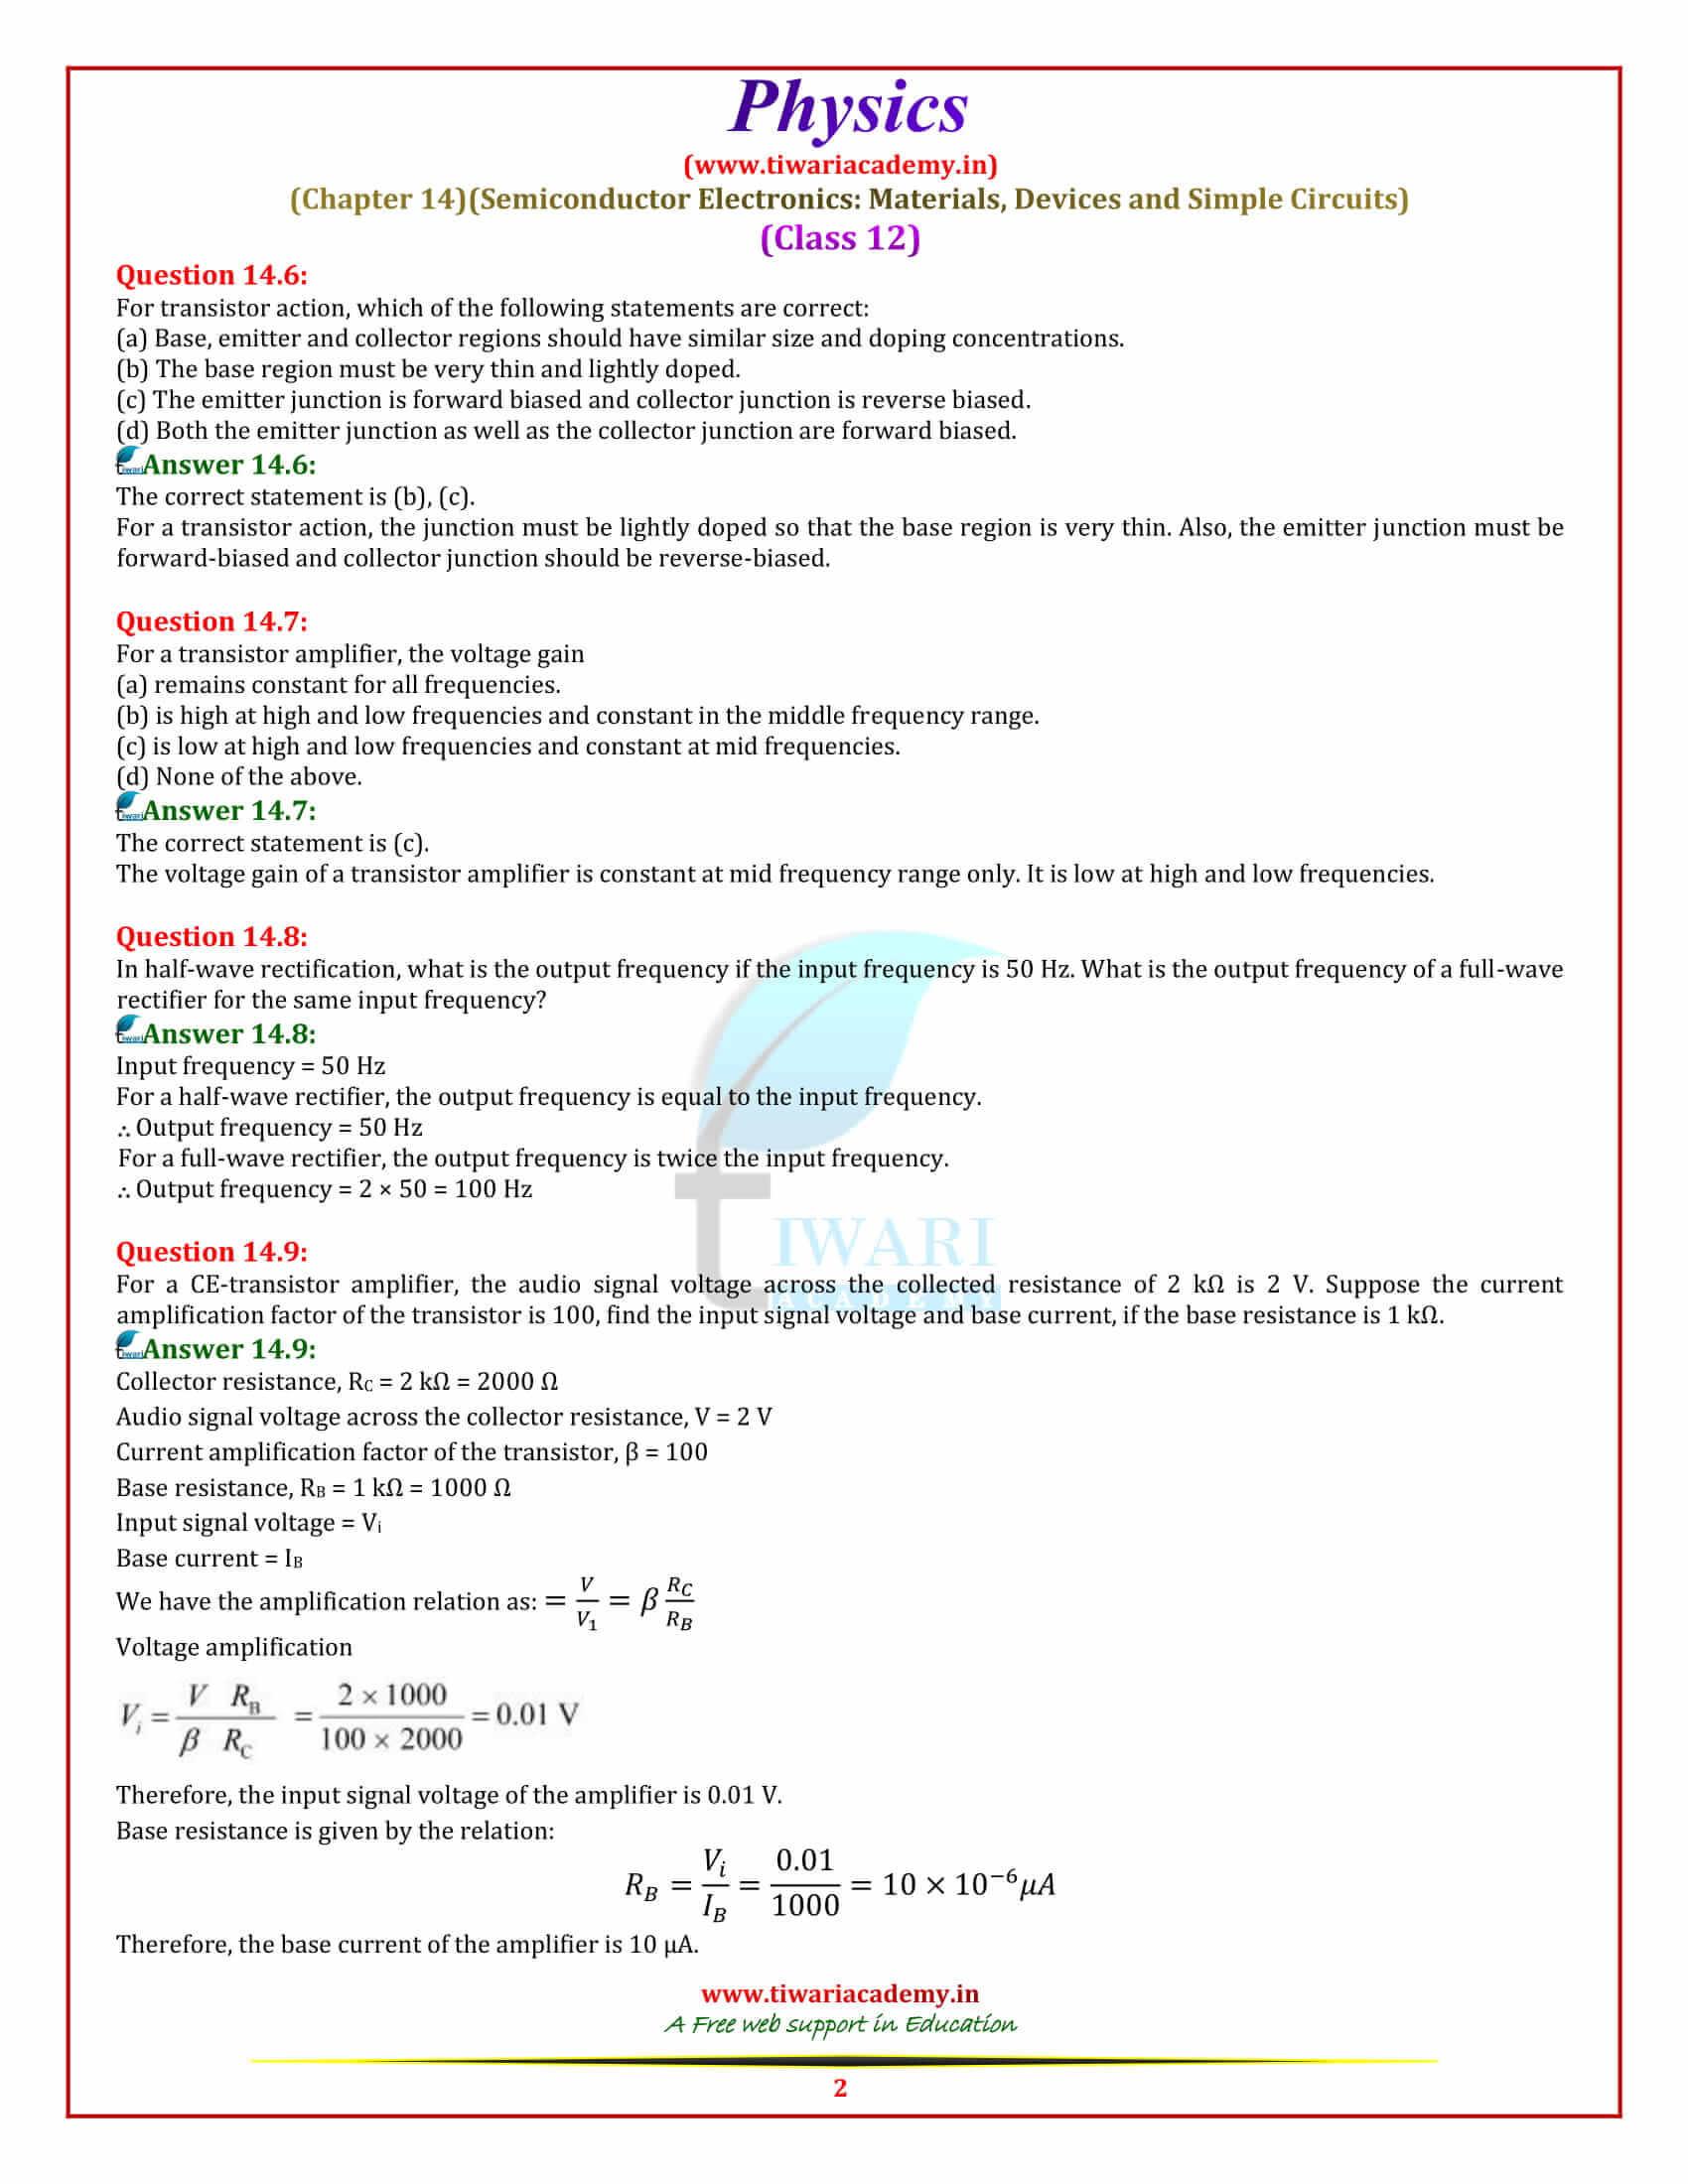 NCERT Solutions for Class 12 Physics Chapter 14 Semiconductor Electronics in pdf form